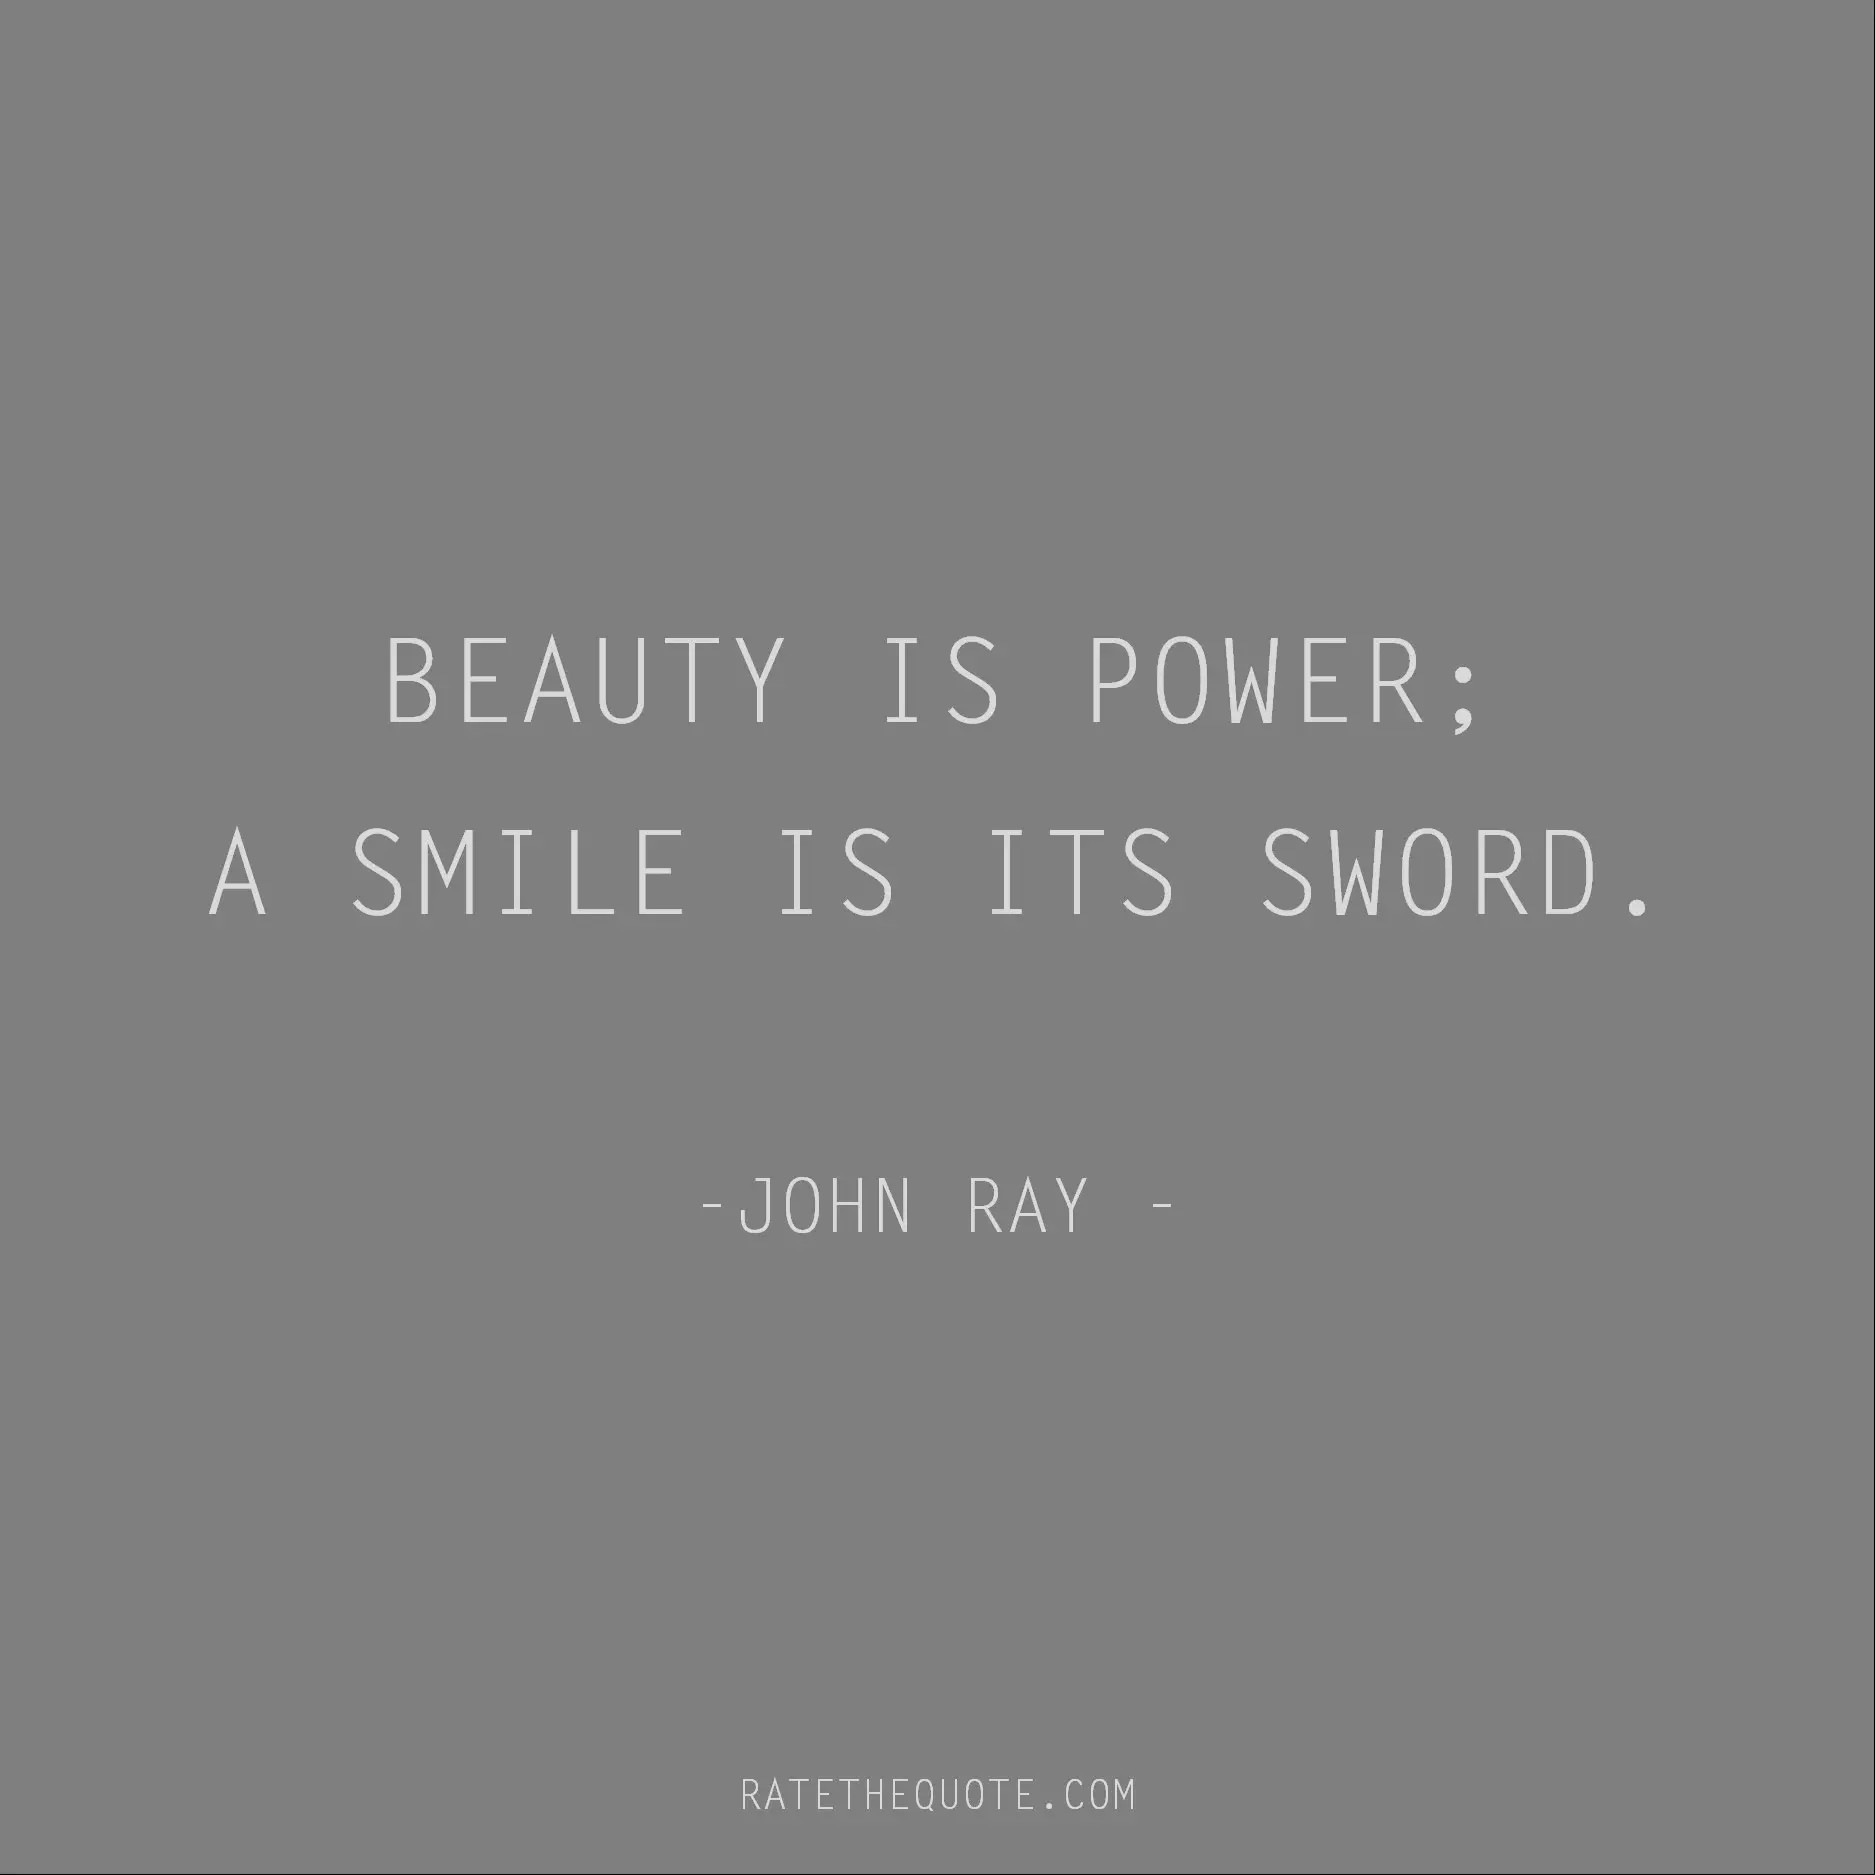 Quotes About Beauty Beauty is power; a smile is its sword. John Ray